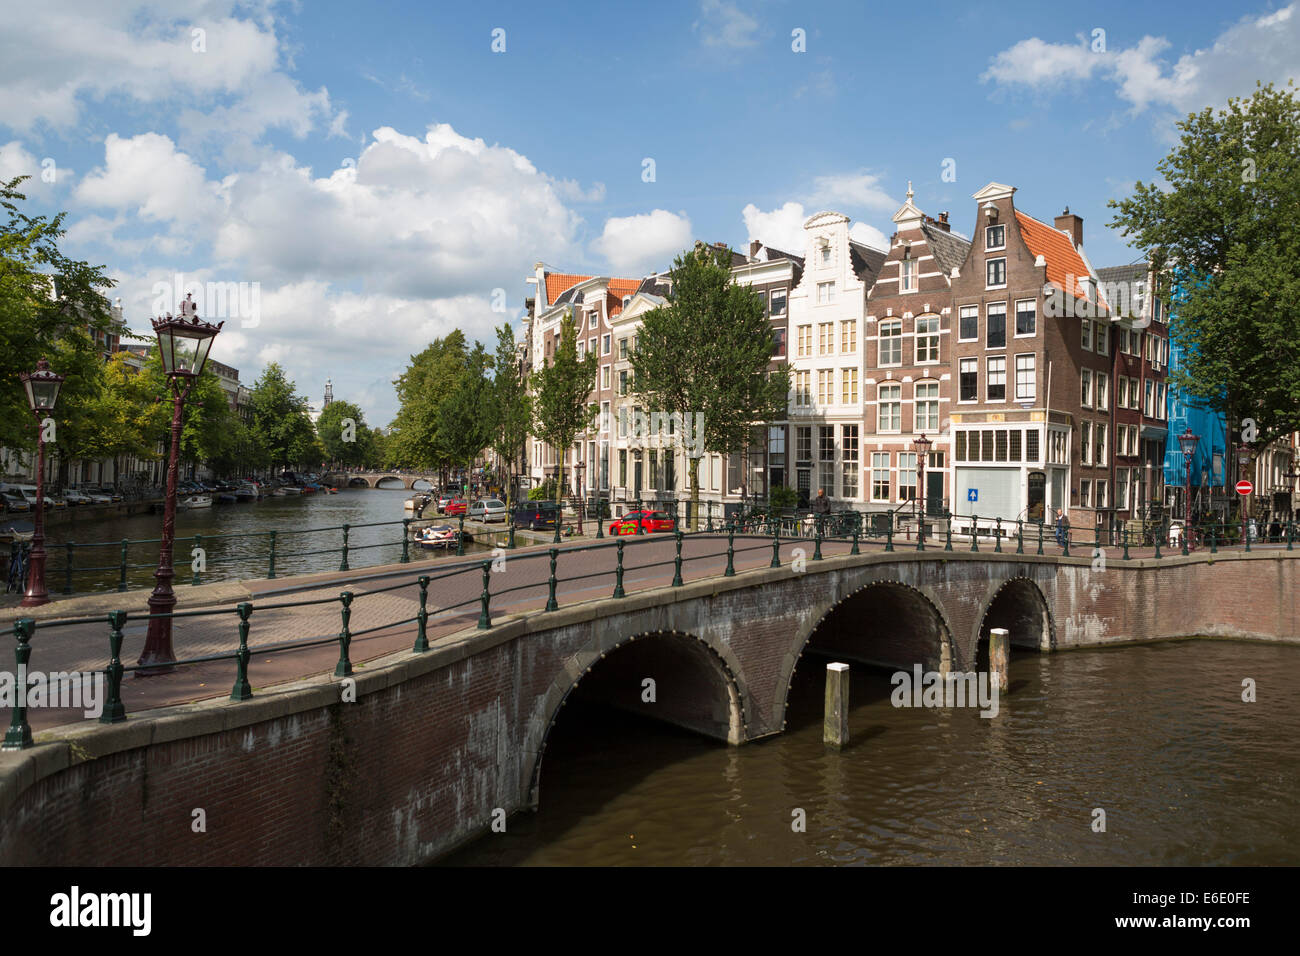 View on one of the canals (Keizersgracht) with a bridge and historical houses in the famous neighborhood 'Jordaan' in Amsterdam Stock Photo